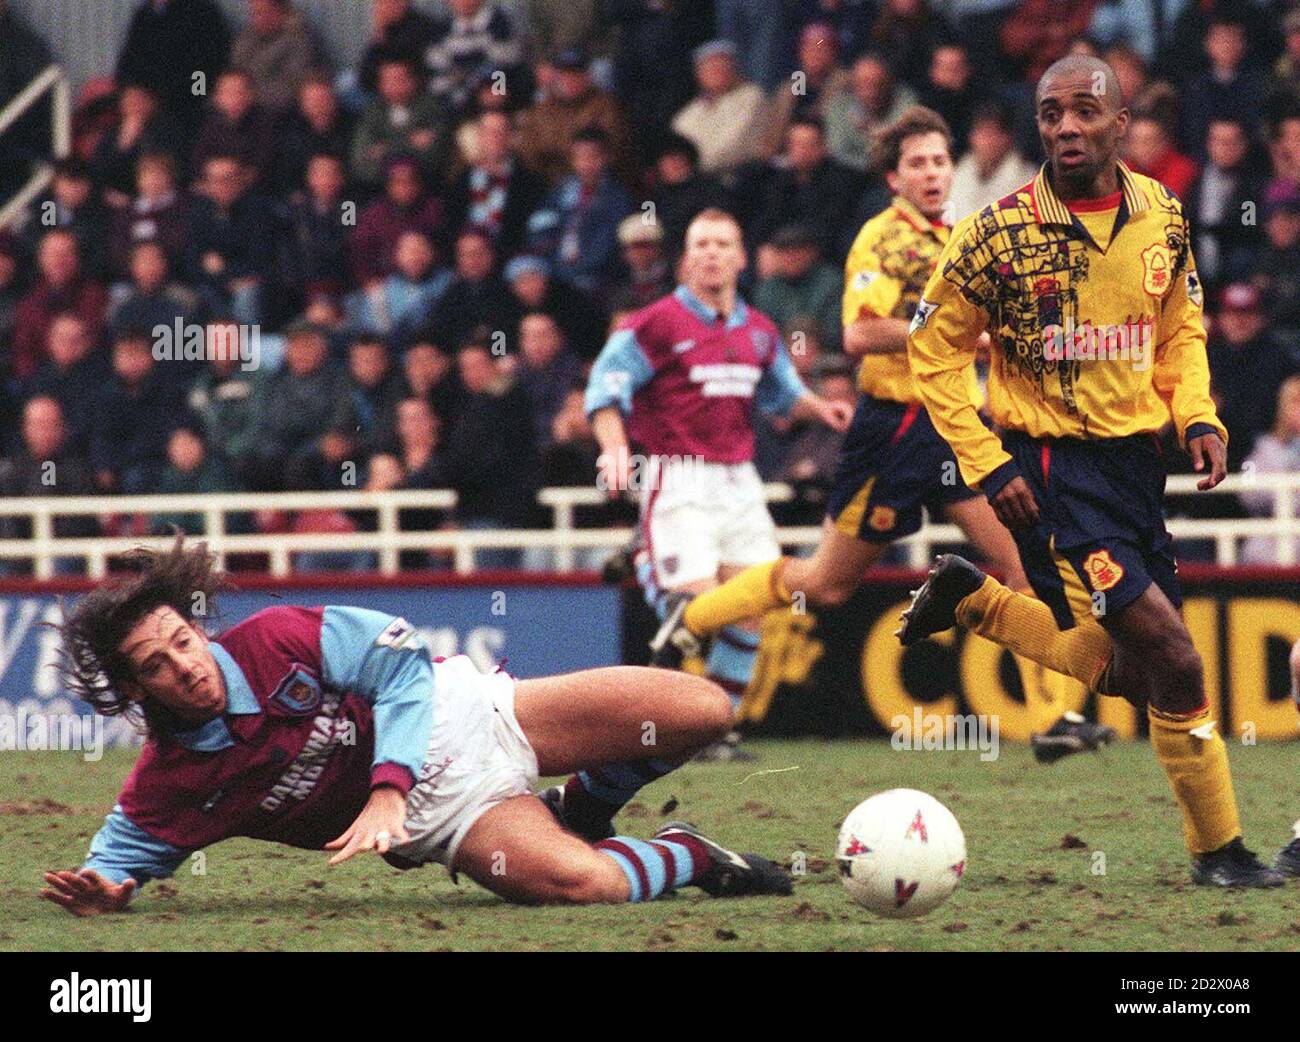 West Ham's Ian Bishop slides to beat Notts Forest's Brian Roy to the ball in today's (Saturday) Premiership match at Upton Park.  Stock Photo